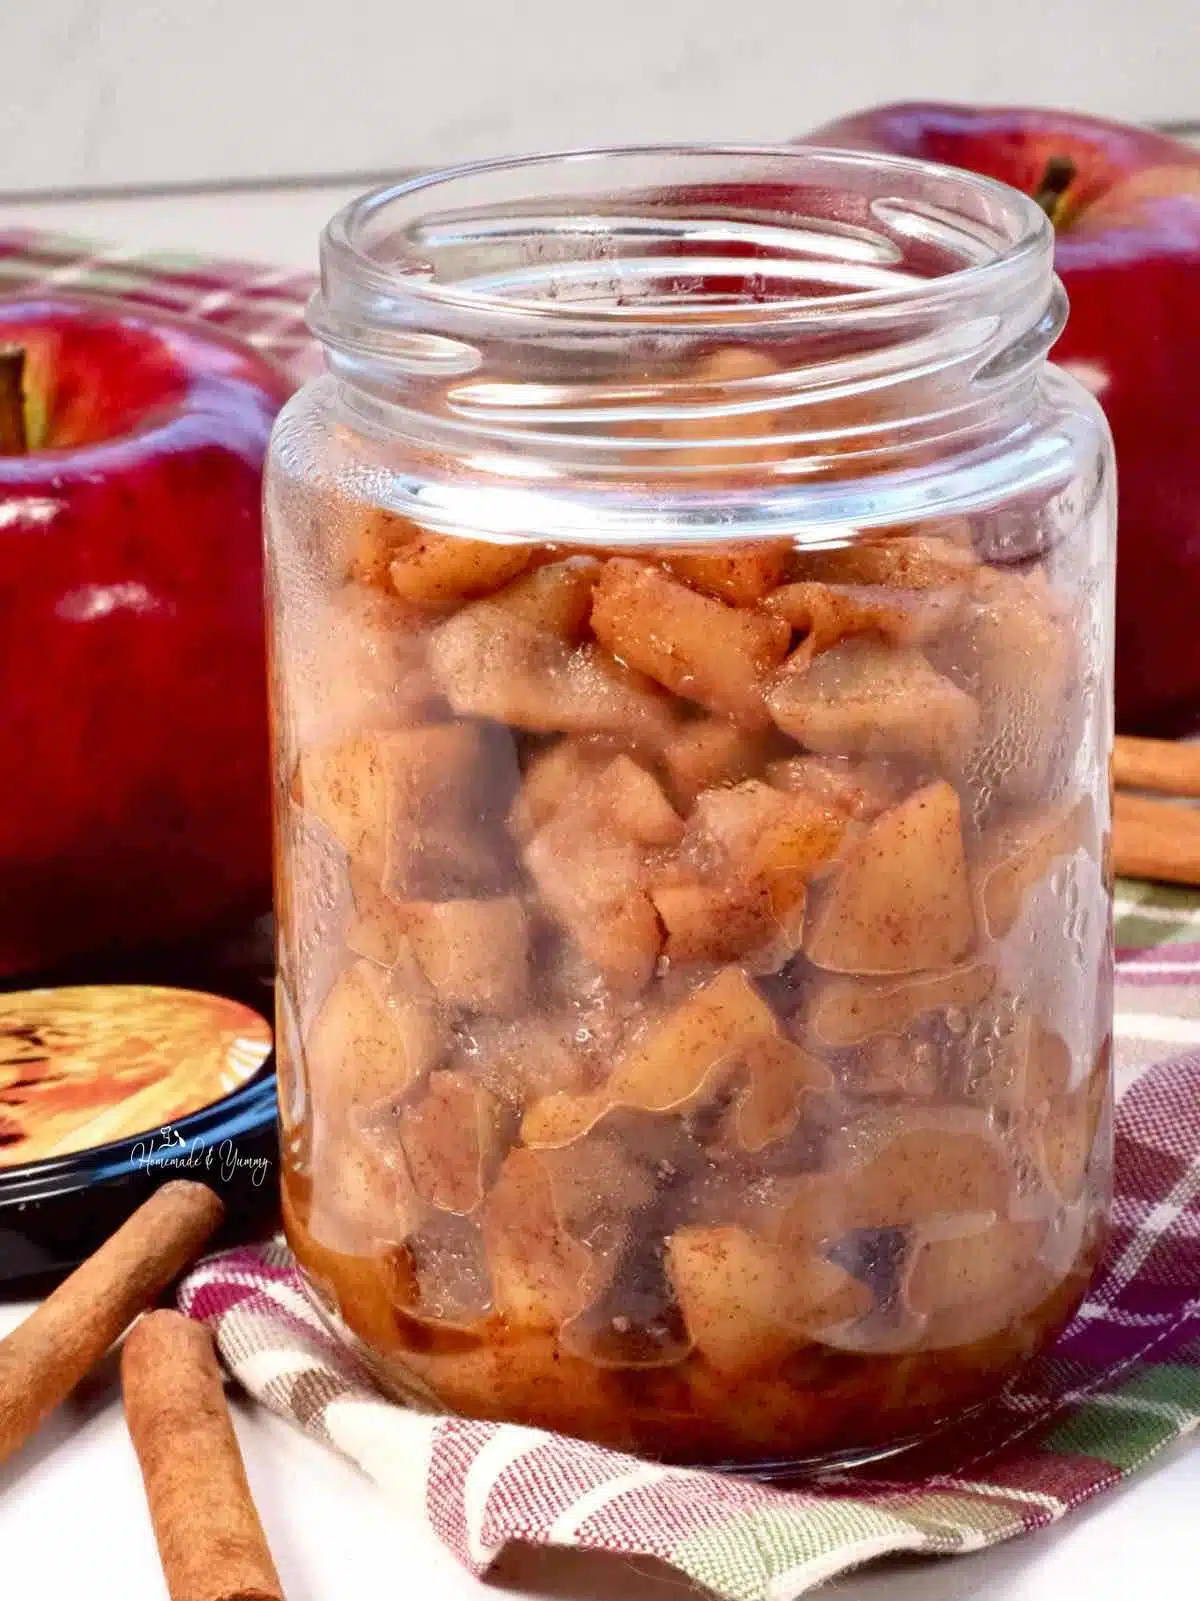 A jar of homemade spiced apple compote.